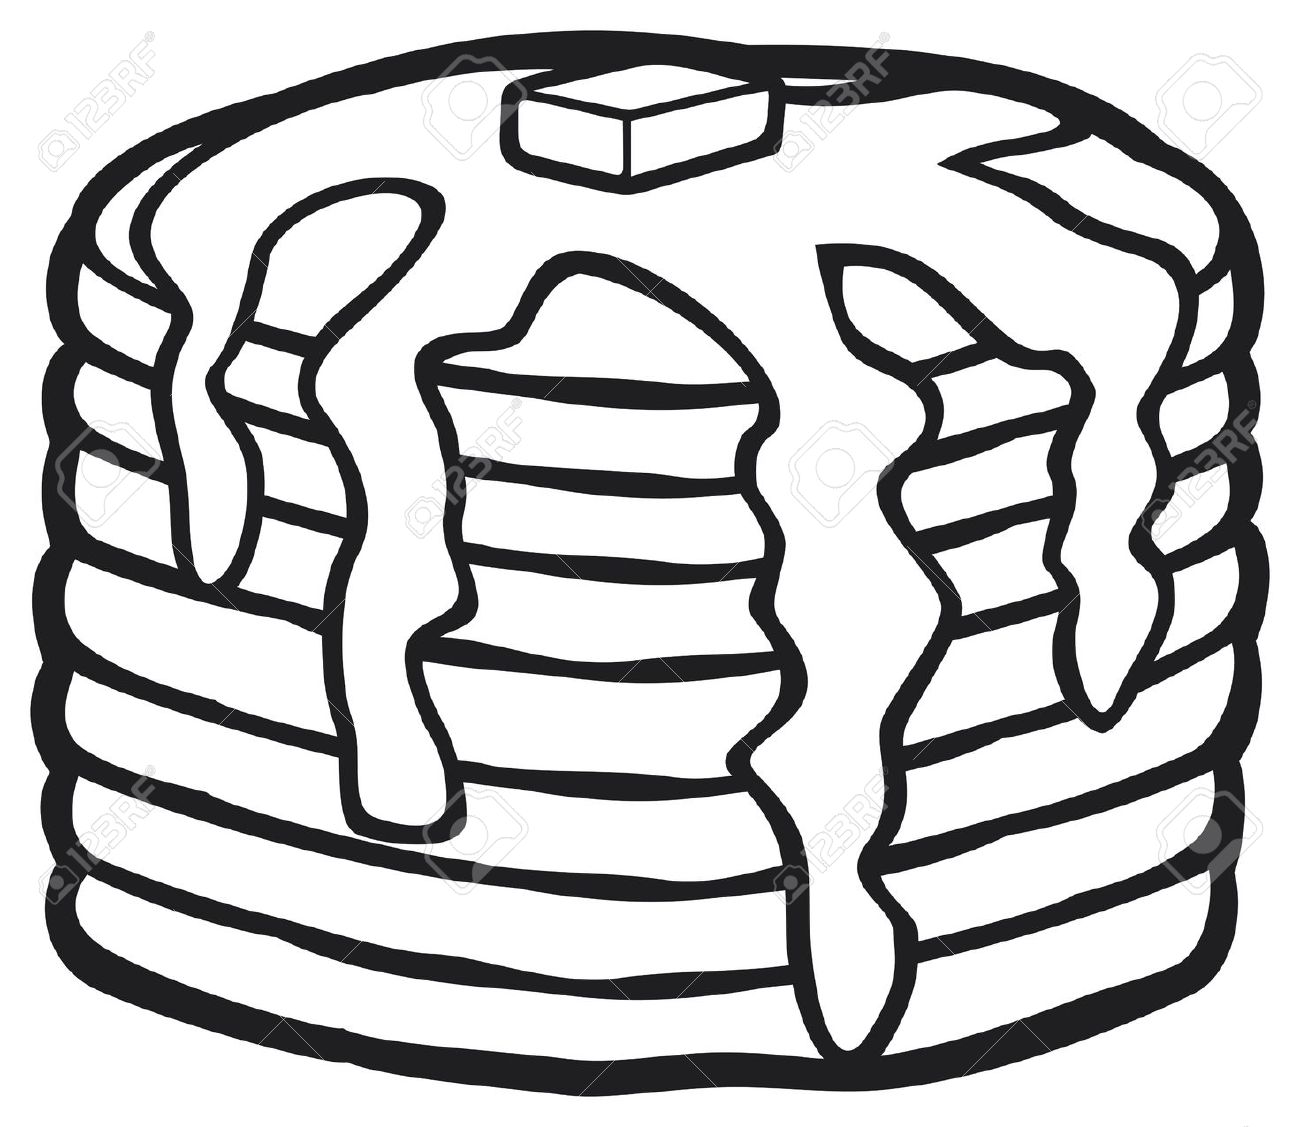 pancakes-clipart-black-and-white-clipground